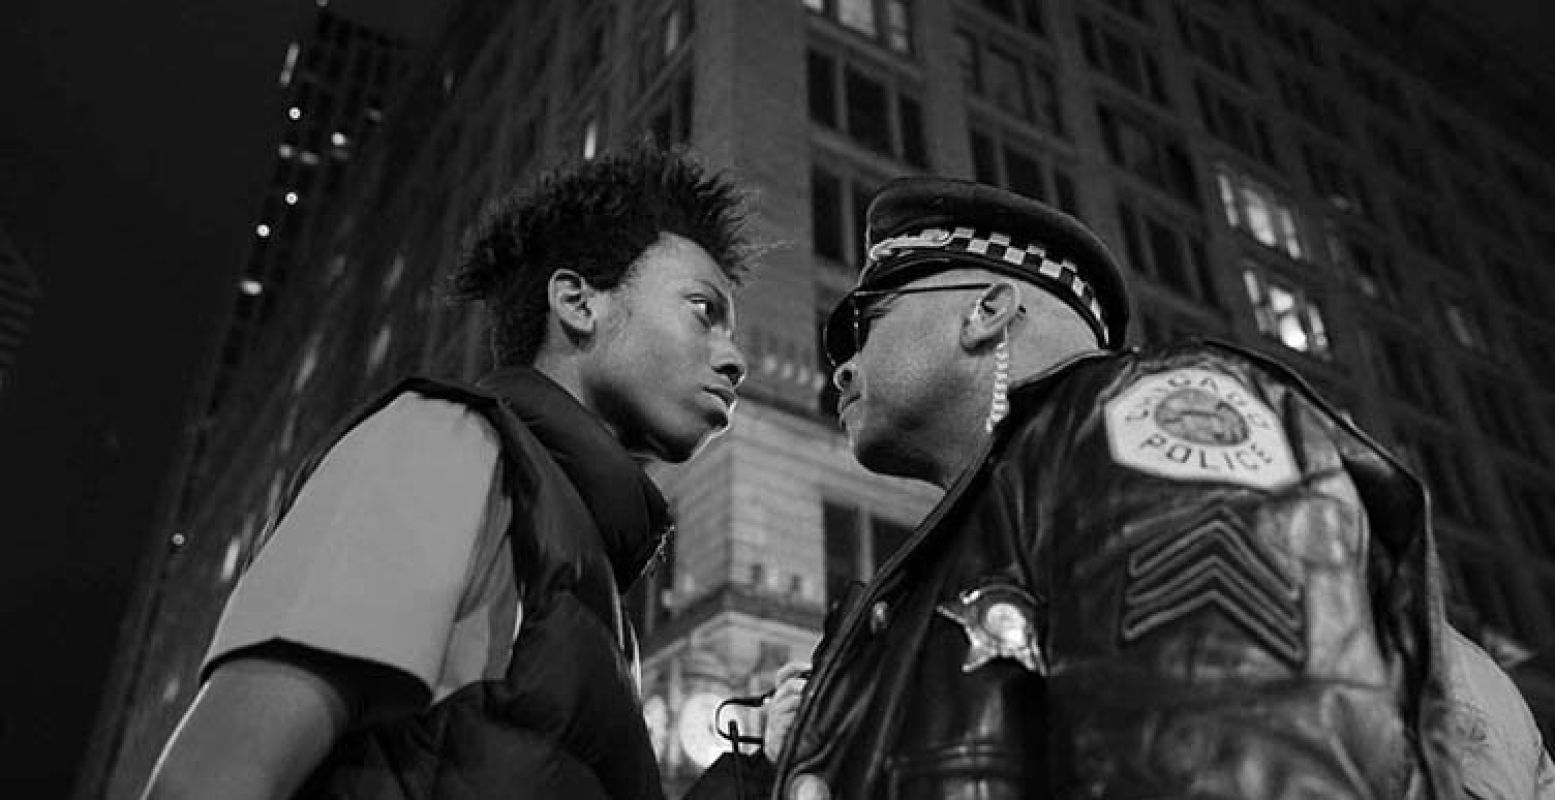 Contemporary Issues, 3rd prize singles. John J. Kim, USA, 2015, Chicago Tribune, March Against Police Violence. Lamon Reccord stares down a police sergeant during a protest following the fatal shooting of Laquan McDonald by police in Chicago, Illinois, USA, 25 November 2015.